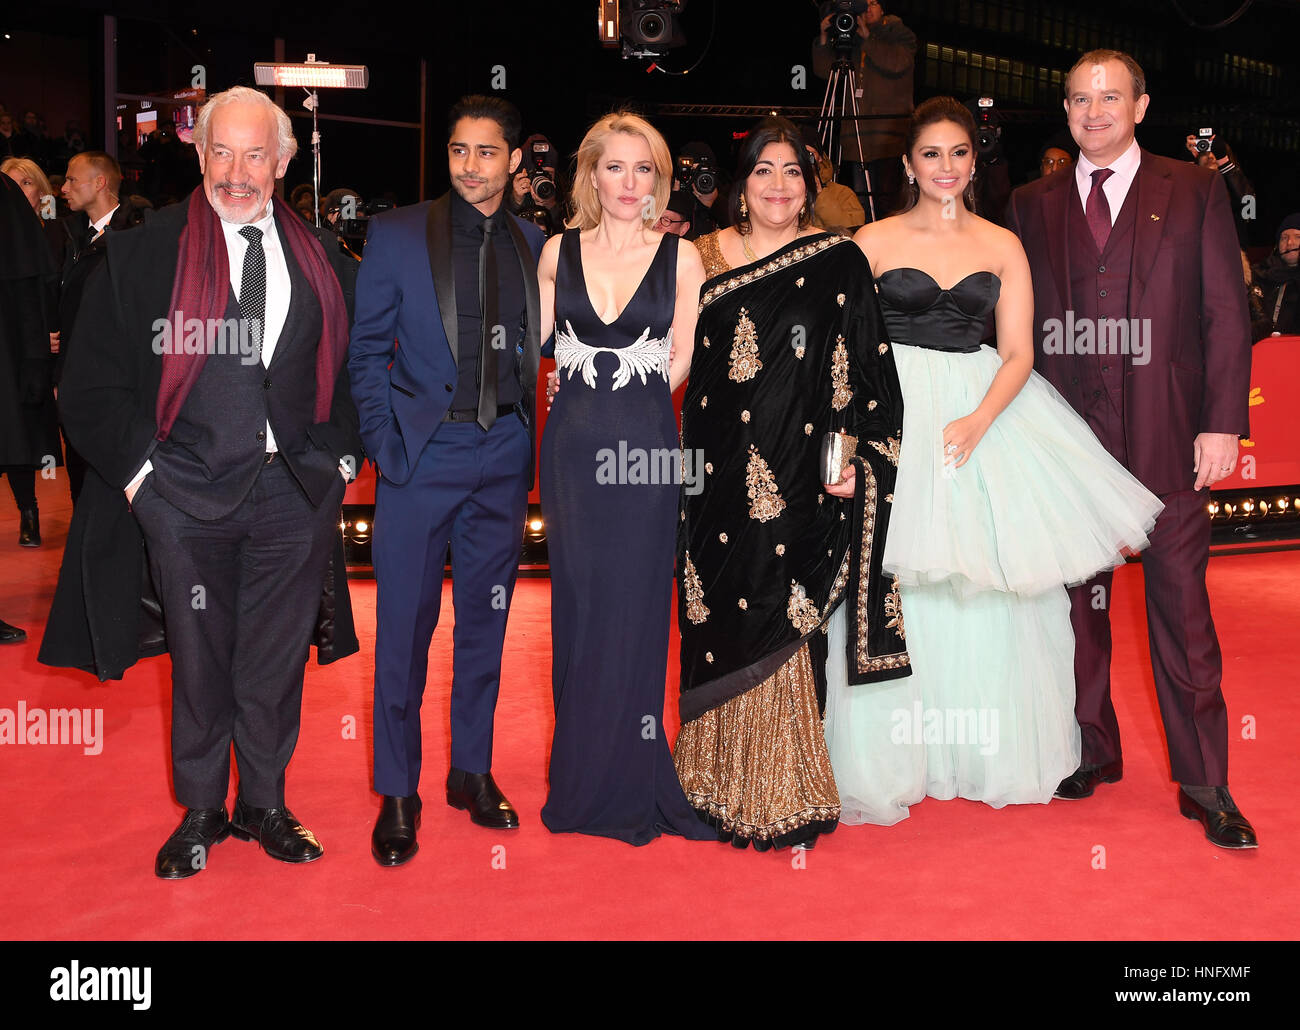 Berlin, Germany. 12th Feb, 2017. Actors (l-r) Michael Gambon, Manish Dayal, Gillian Anderson, Gurinder Chadha (director), Huma Qureshi and Hugh Bonneville on the red carpet at for 'Viceroy·s House' at the 67th International Berlin Film Festival, Berlinale, in Berlin, Germany, 12 February 2017. The film, an Indian-British co-production, is running out of rival films in the Berlinale competition. Photo: Britta Pedersen/dpa/Alamy Live News Stock Photo